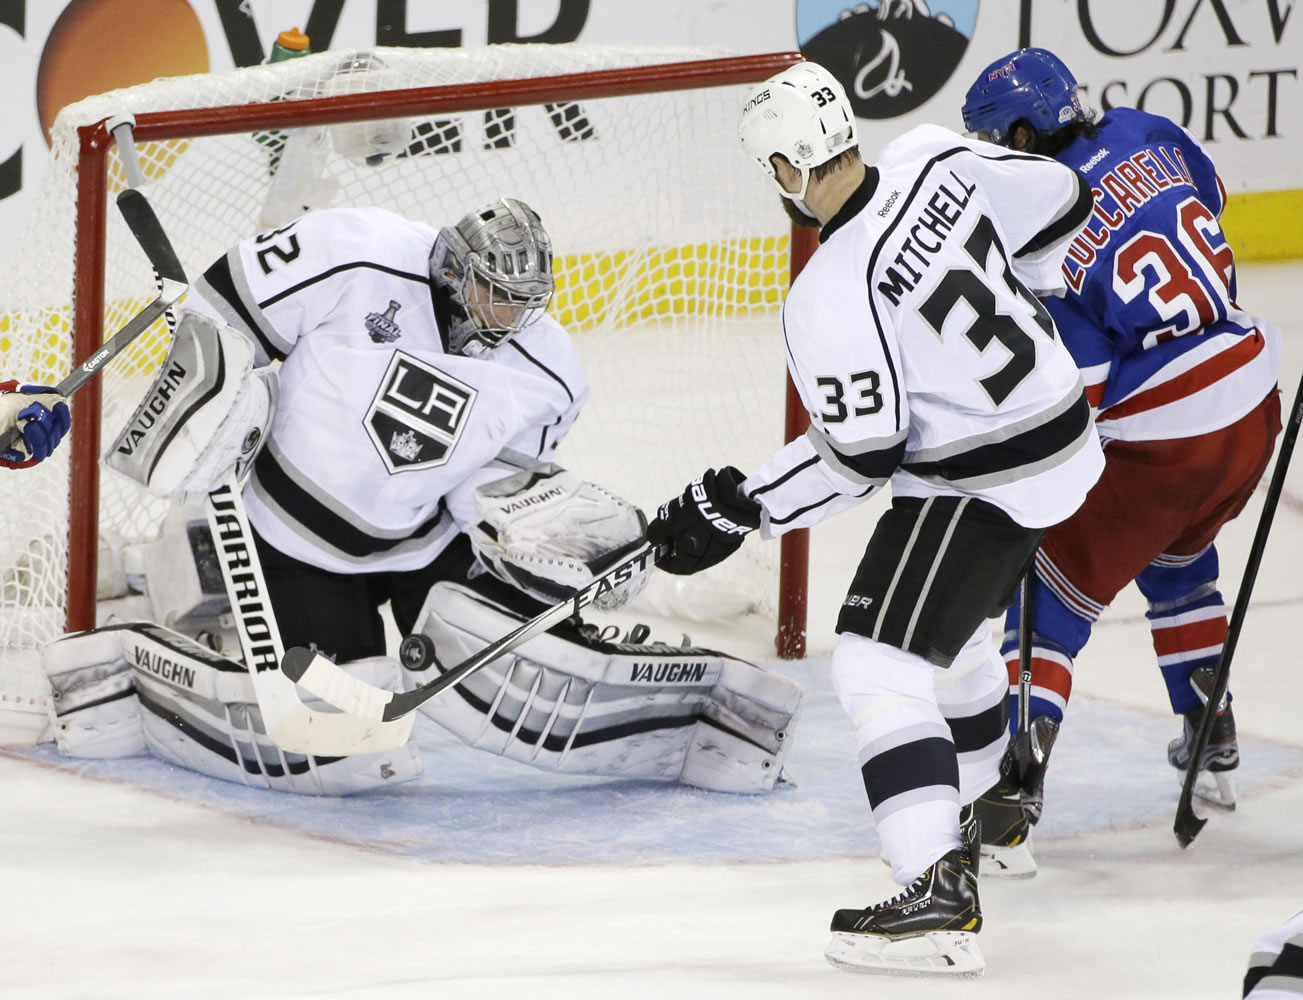 Los Angeles Kings goalie Jonathan Quick (32) blocks a shot by New York Rangers right wing Mats Zuccarello (36) as Kings defenseman Willie Mitchell (33) helps defend in the second period during Game 3 of the NHL hockey Stanley Cup Final, Monday, June 9, 2014, in New York.